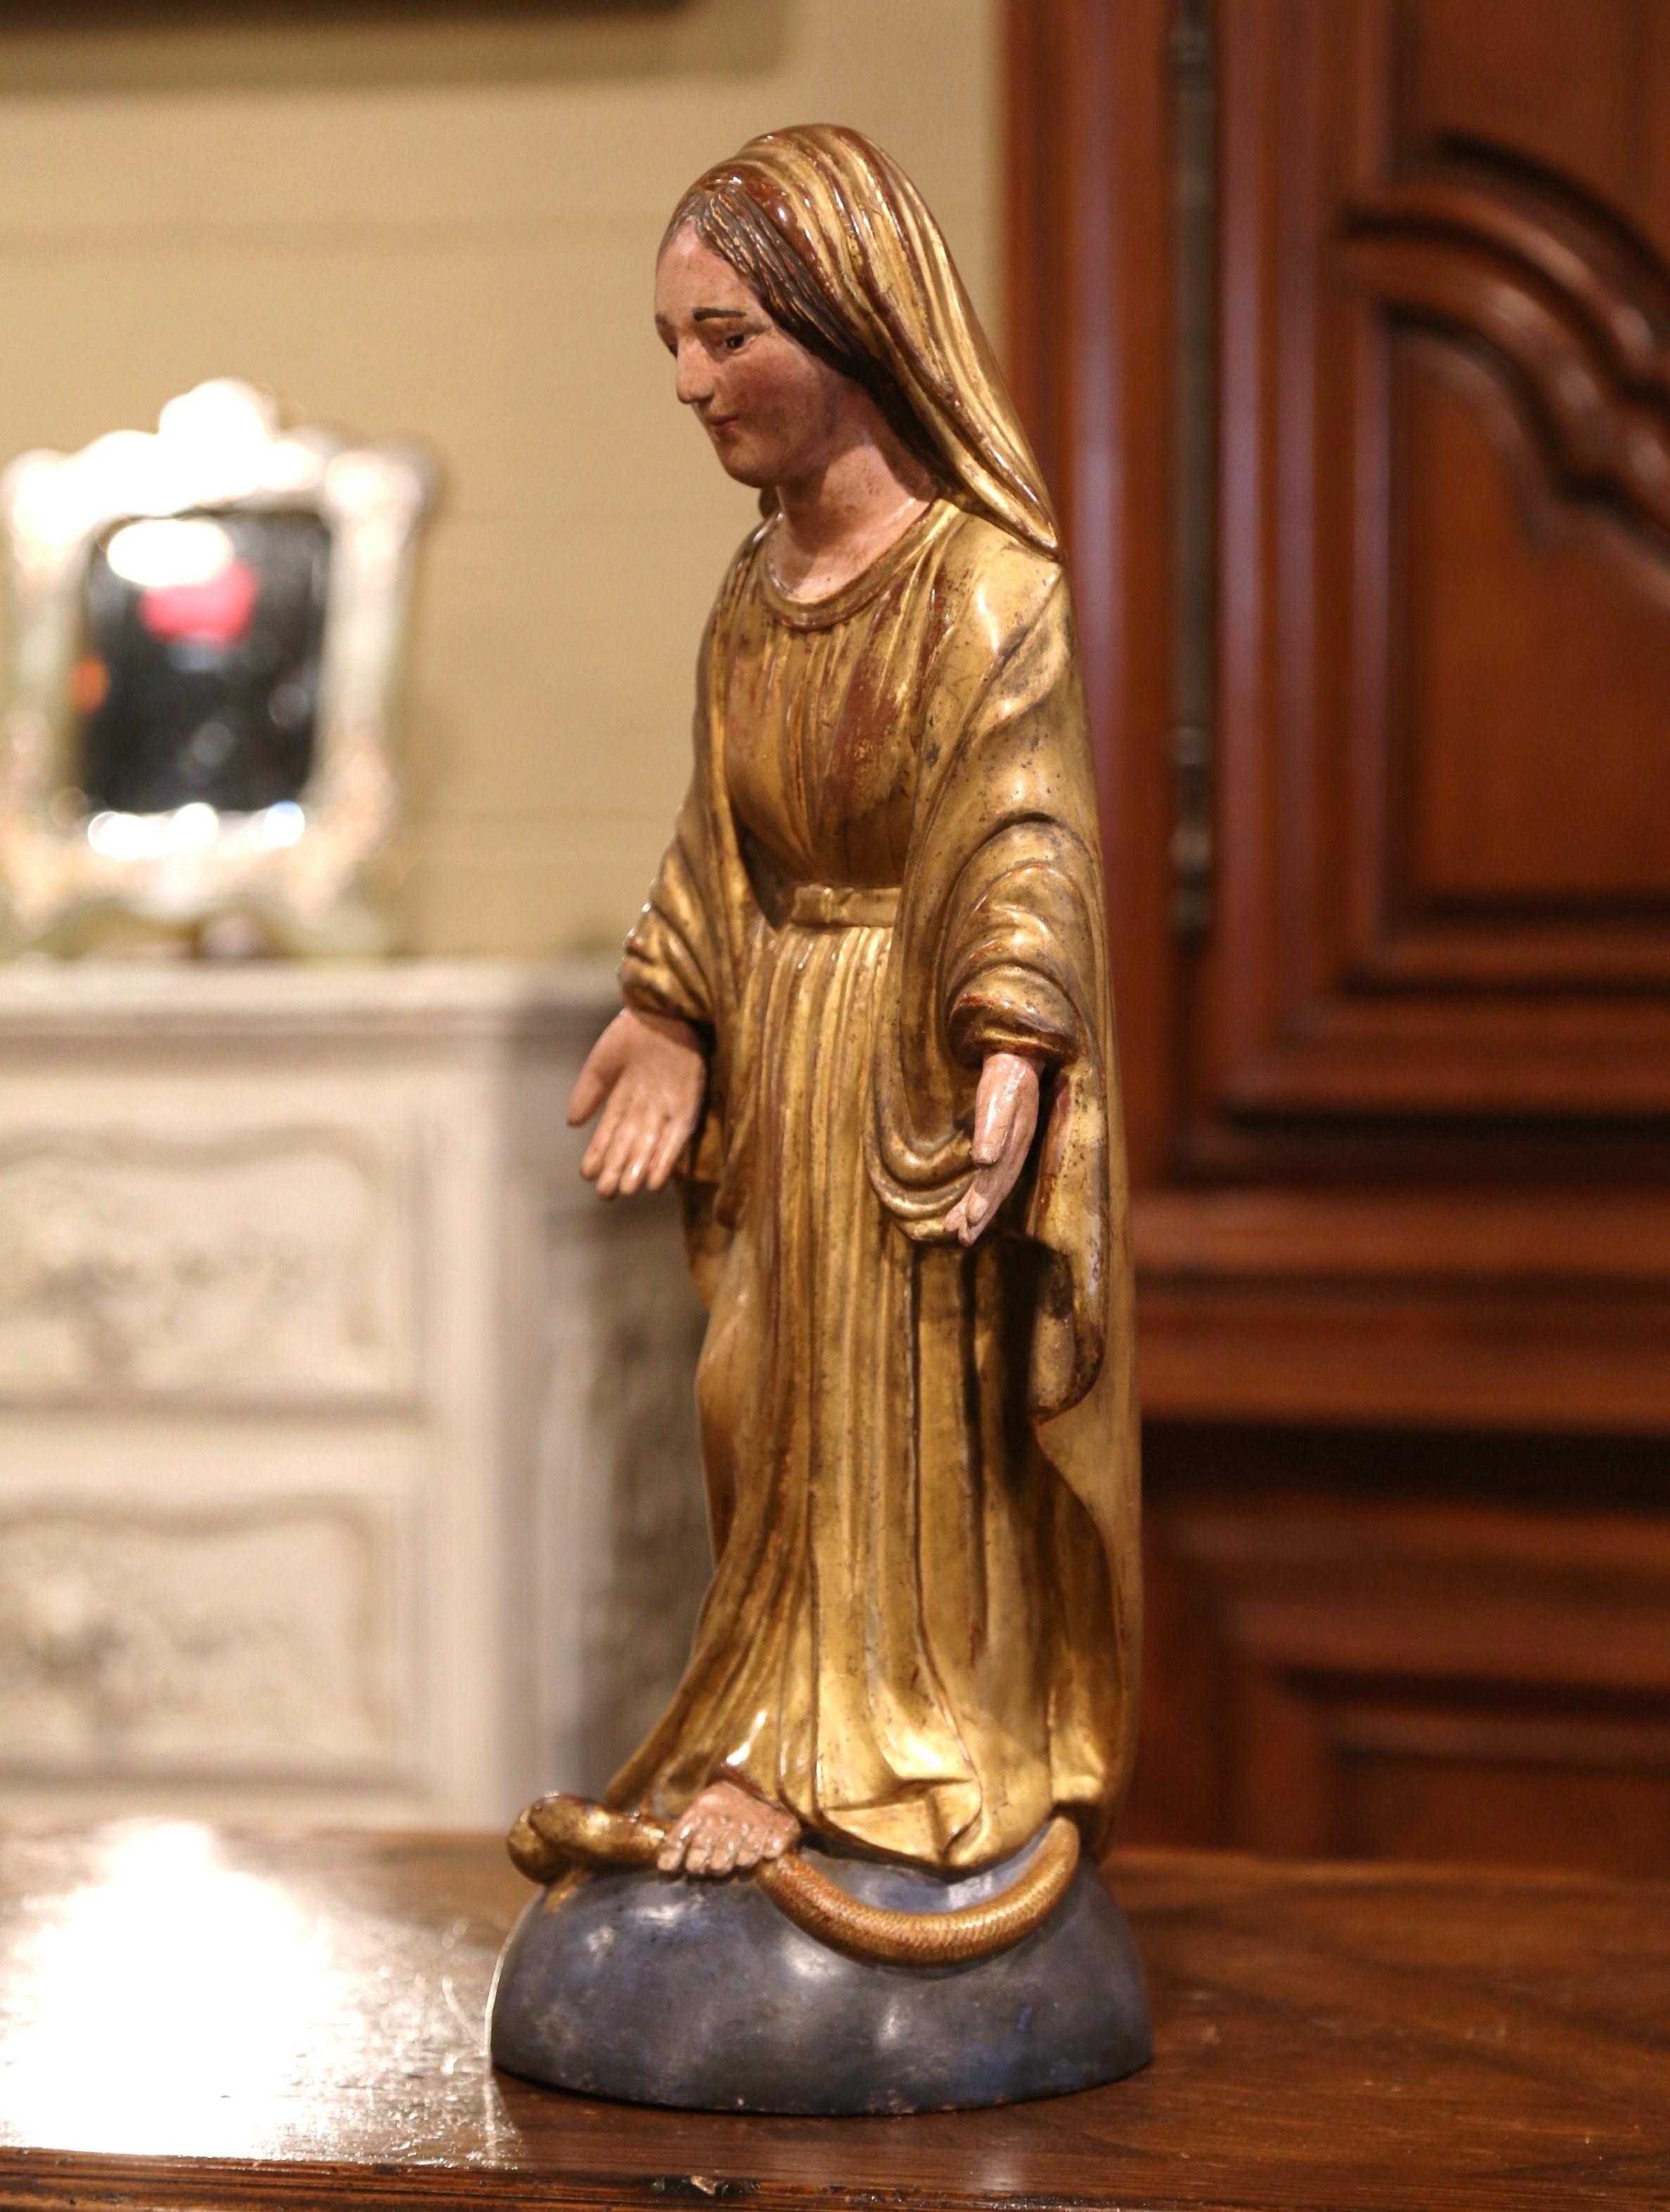 This beautiful, antique sculpture of the Virgin Mary in prayers was created in Pyrenees of France, circa 1860. Embellished with gold leaf and polychrome finish, the Classic religious figure is beautifully ornate and has wonderful details throughout